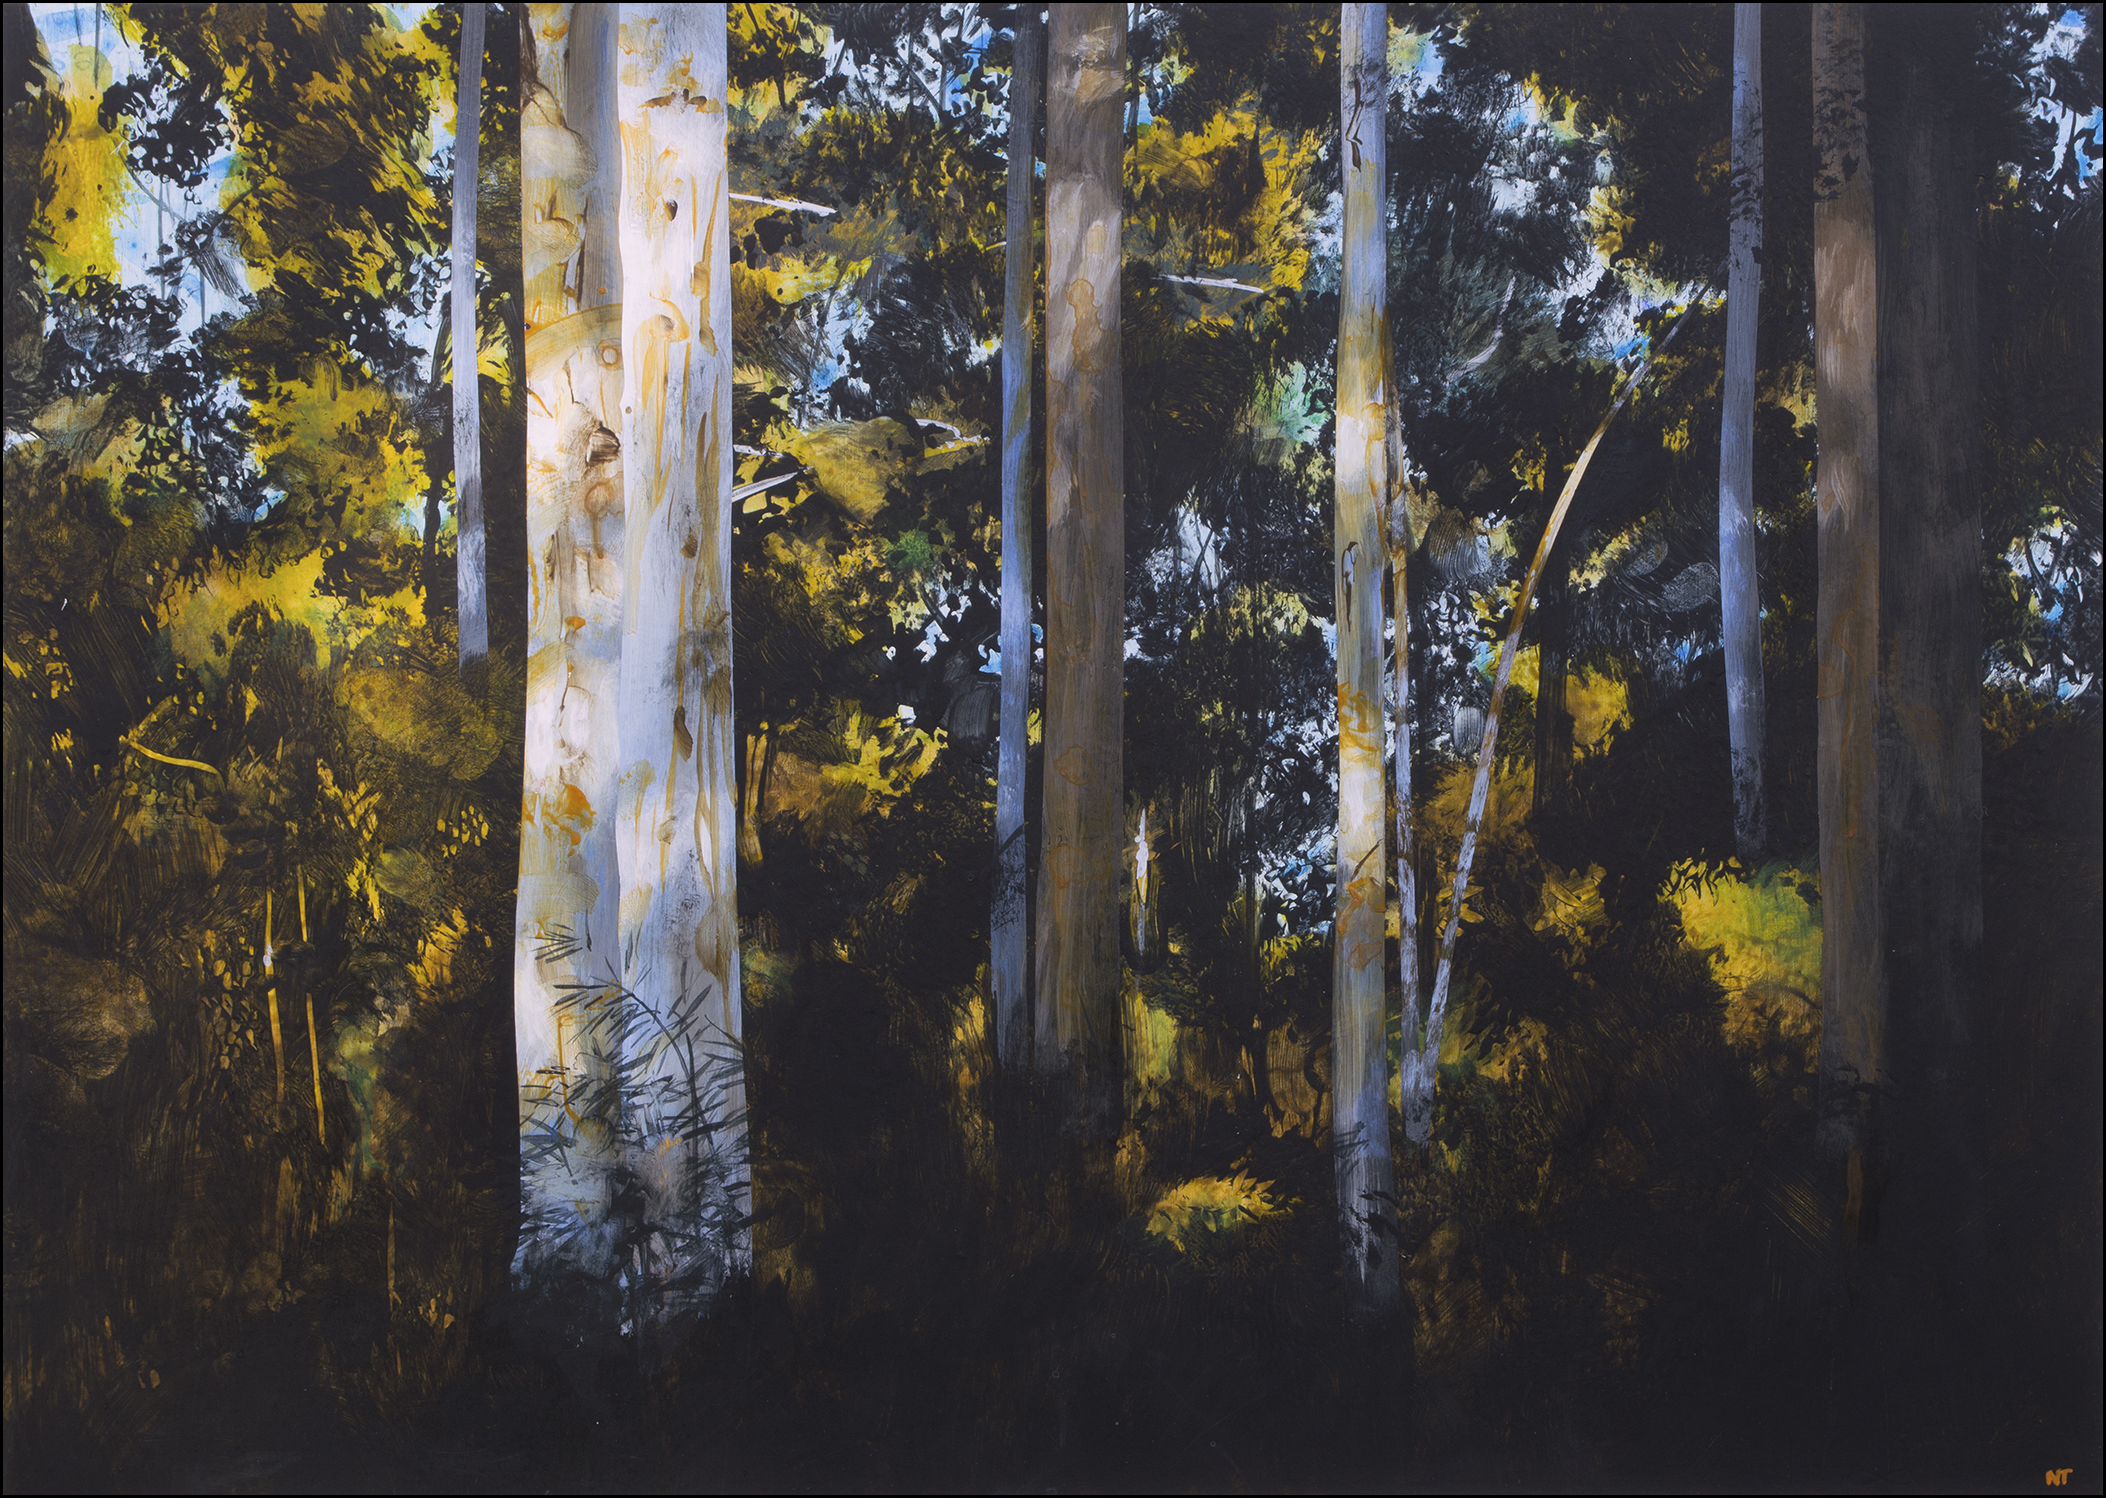 Neil Taylor 'Early Colours' watercolour on paper on board 64 x 84cm $4,200